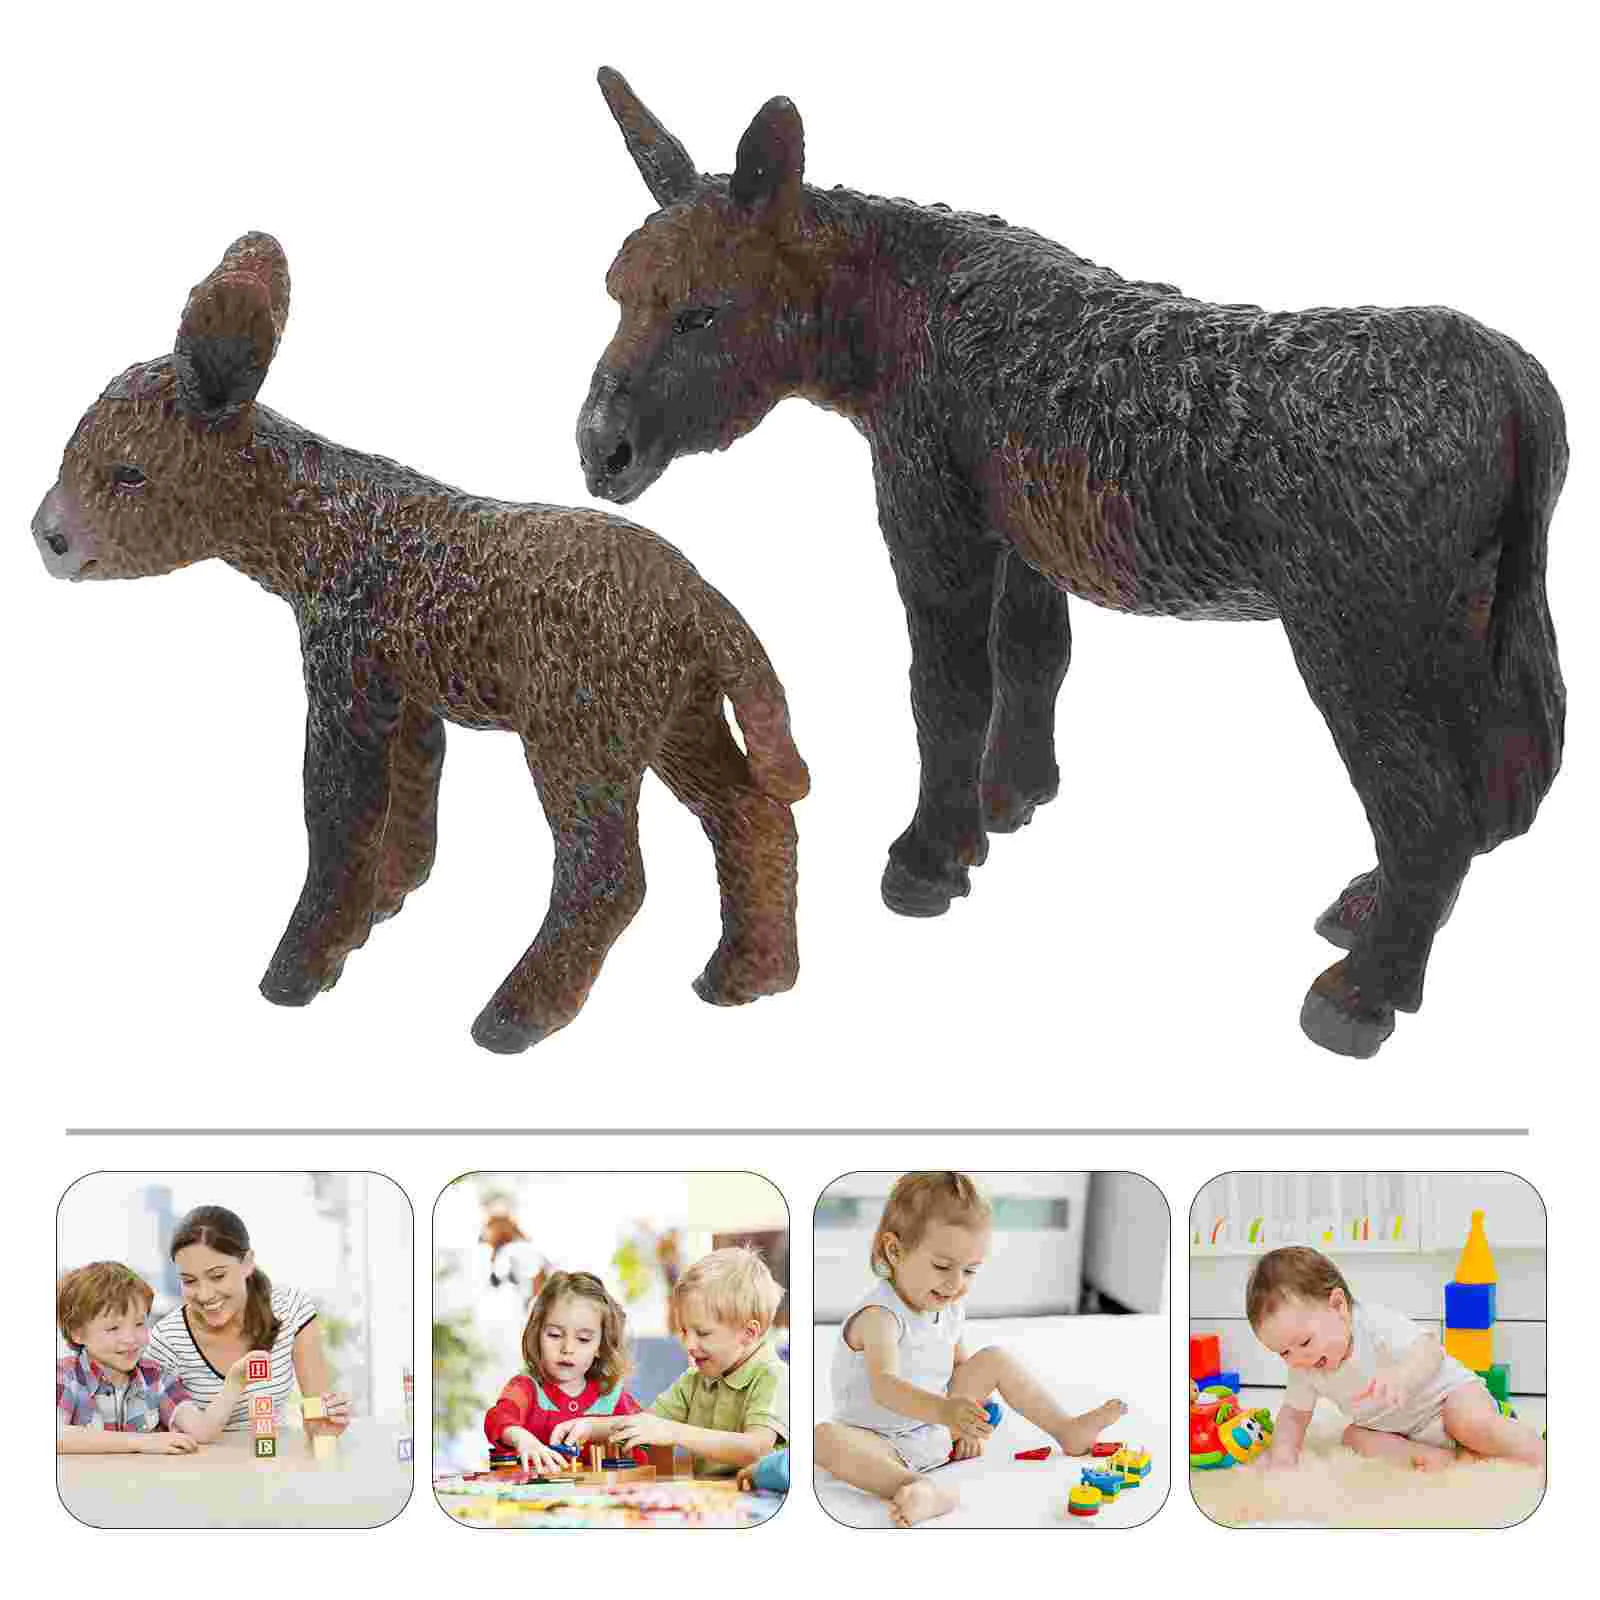 

Donkey Decorations The Home Animal Model Ornament Education Simulated Figures Standing Toy Statue Kids Ornaments